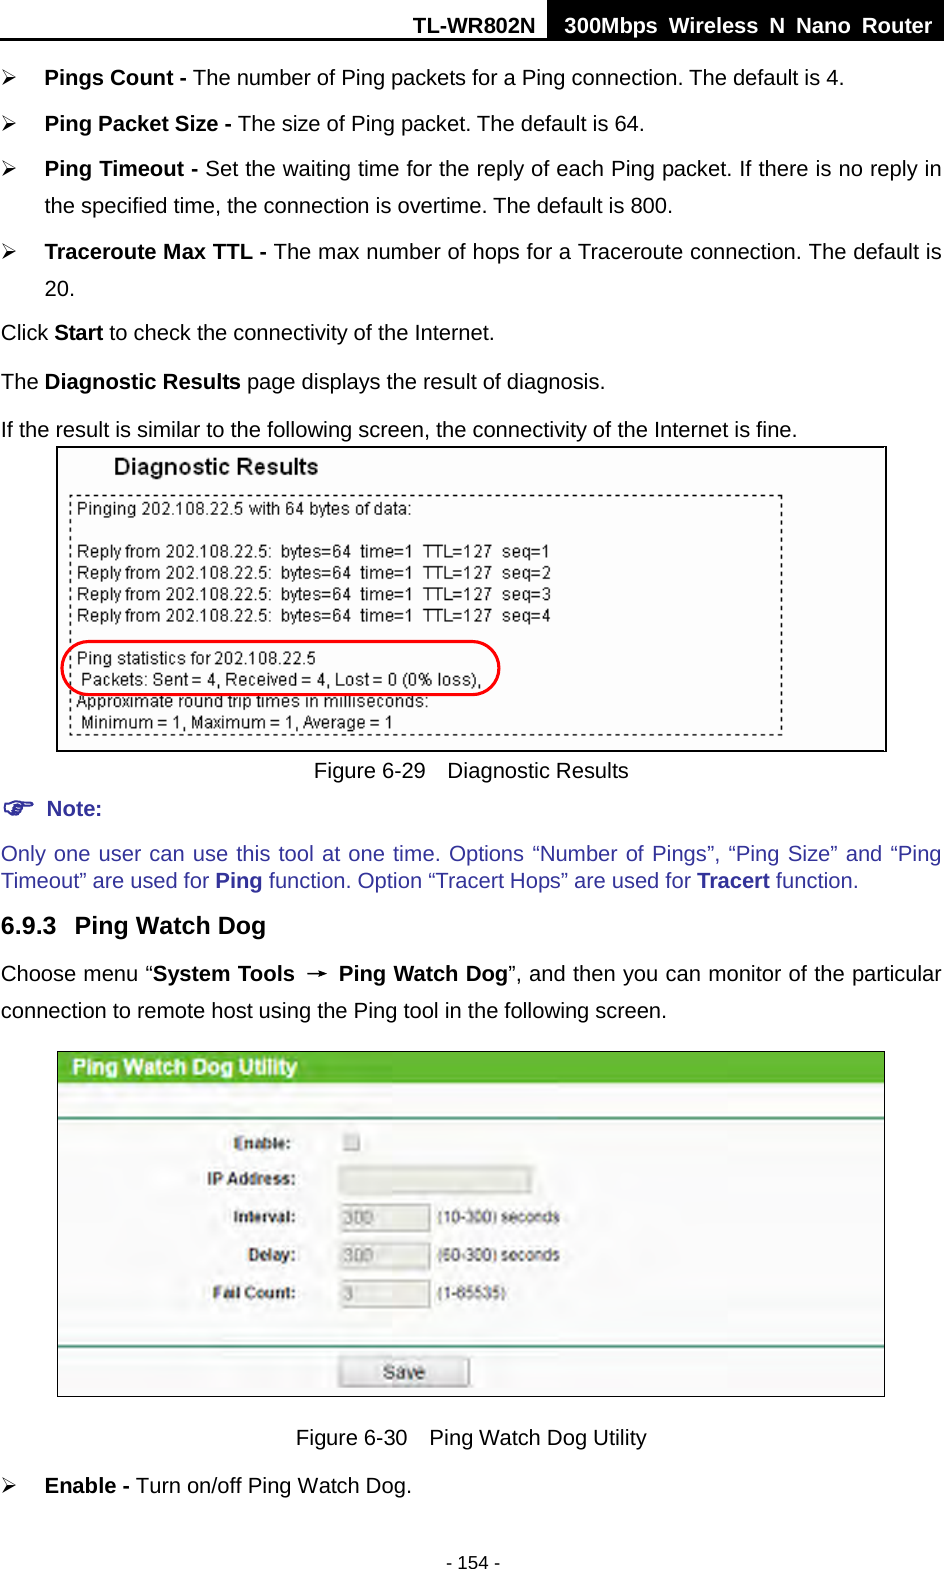 TL-WR802N  300Mbps Wireless N Nano Router   Pings Count - The number of Ping packets for a Ping connection. The default is 4.  Ping Packet Size - The size of Ping packet. The default is 64.  Ping Timeout - Set the waiting time for the reply of each Ping packet. If there is no reply in the specified time, the connection is overtime. The default is 800.  Traceroute Max TTL - The max number of hops for a Traceroute connection. The default is 20. Click Start to check the connectivity of the Internet.   The Diagnostic Results page displays the result of diagnosis. If the result is similar to the following screen, the connectivity of the Internet is fine.  Figure 6-29  Diagnostic Results  Note: Only one user can use this tool at one time. Options “Number of Pings”, “Ping Size” and “Ping Timeout” are used for Ping function. Option “Tracert Hops” are used for Tracert function. 6.9.3 Ping Watch Dog Choose menu “System Tools  → Ping Watch Dog”, and then you can monitor of the particular connection to remote host using the Ping tool in the following screen.  Figure 6-30  Ping Watch Dog Utility  Enable - Turn on/off Ping Watch Dog. - 154 - 